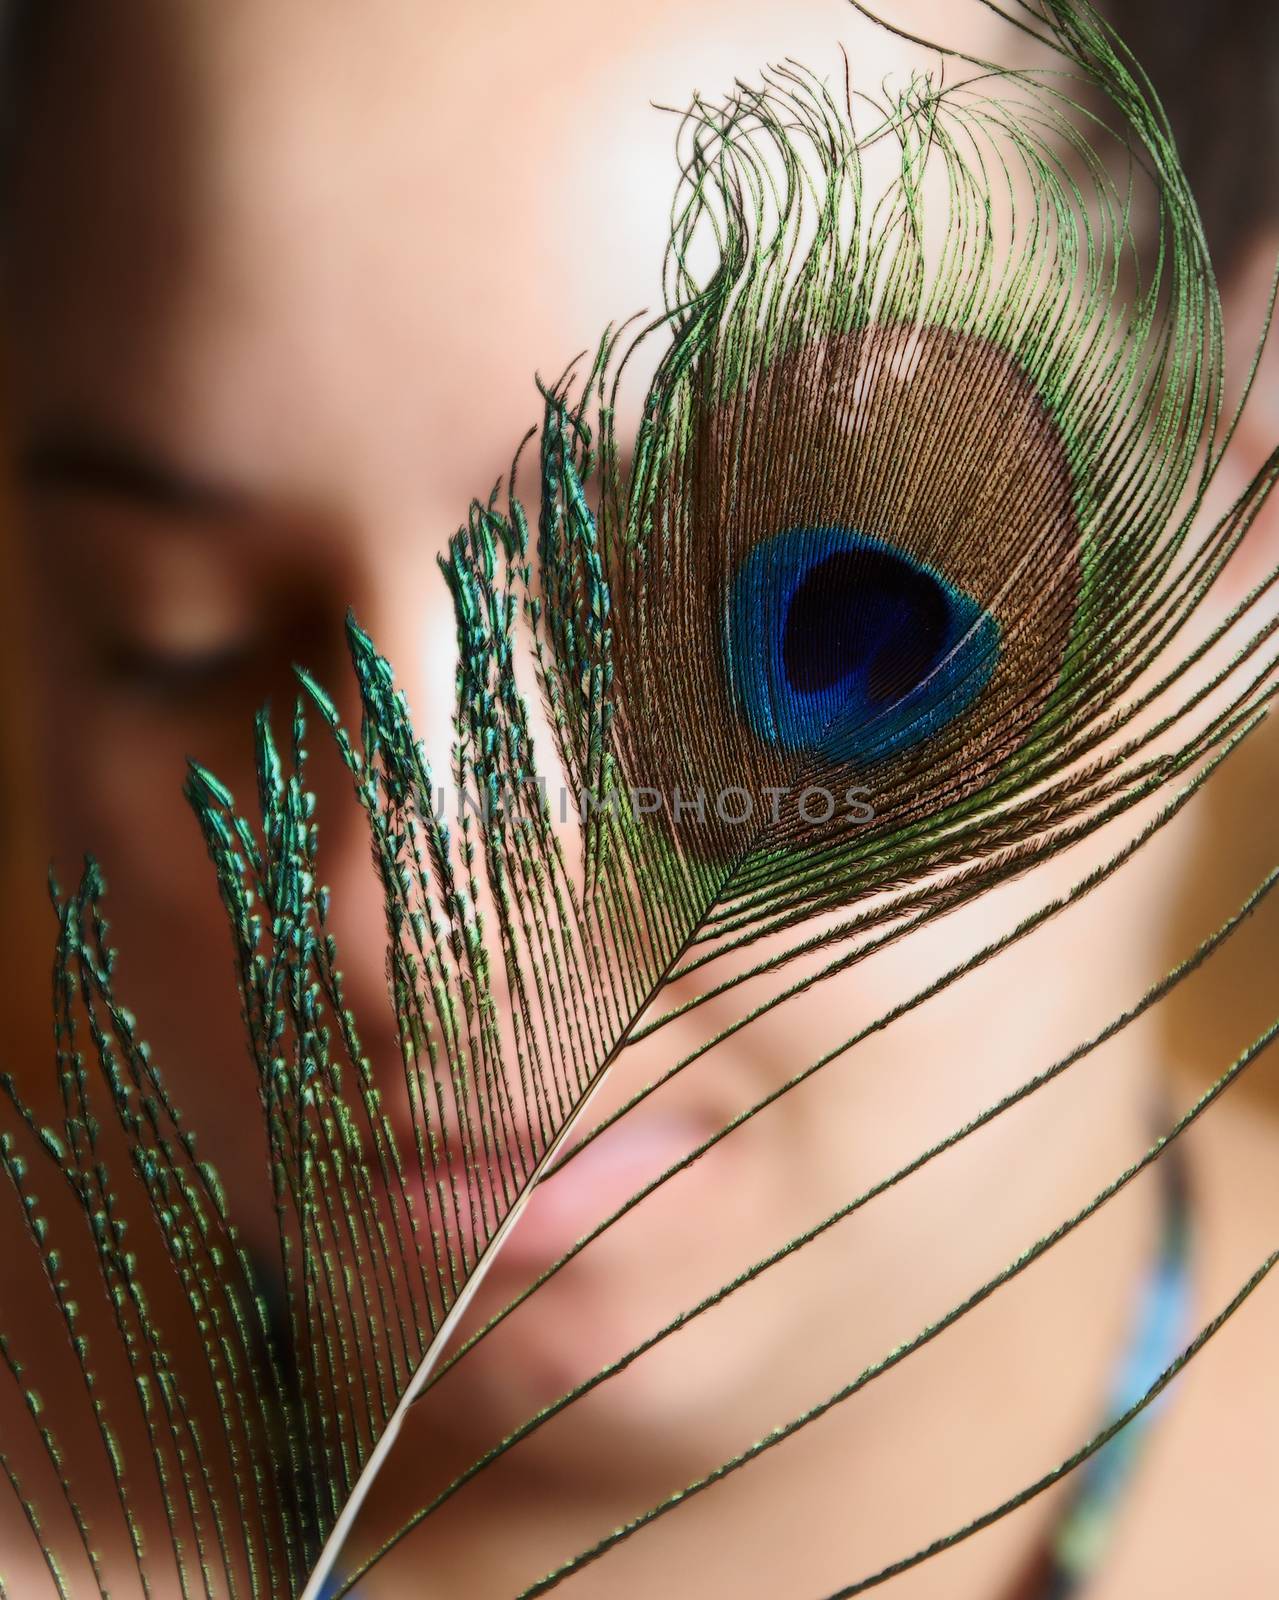 A peacock feather infront of a womans face.